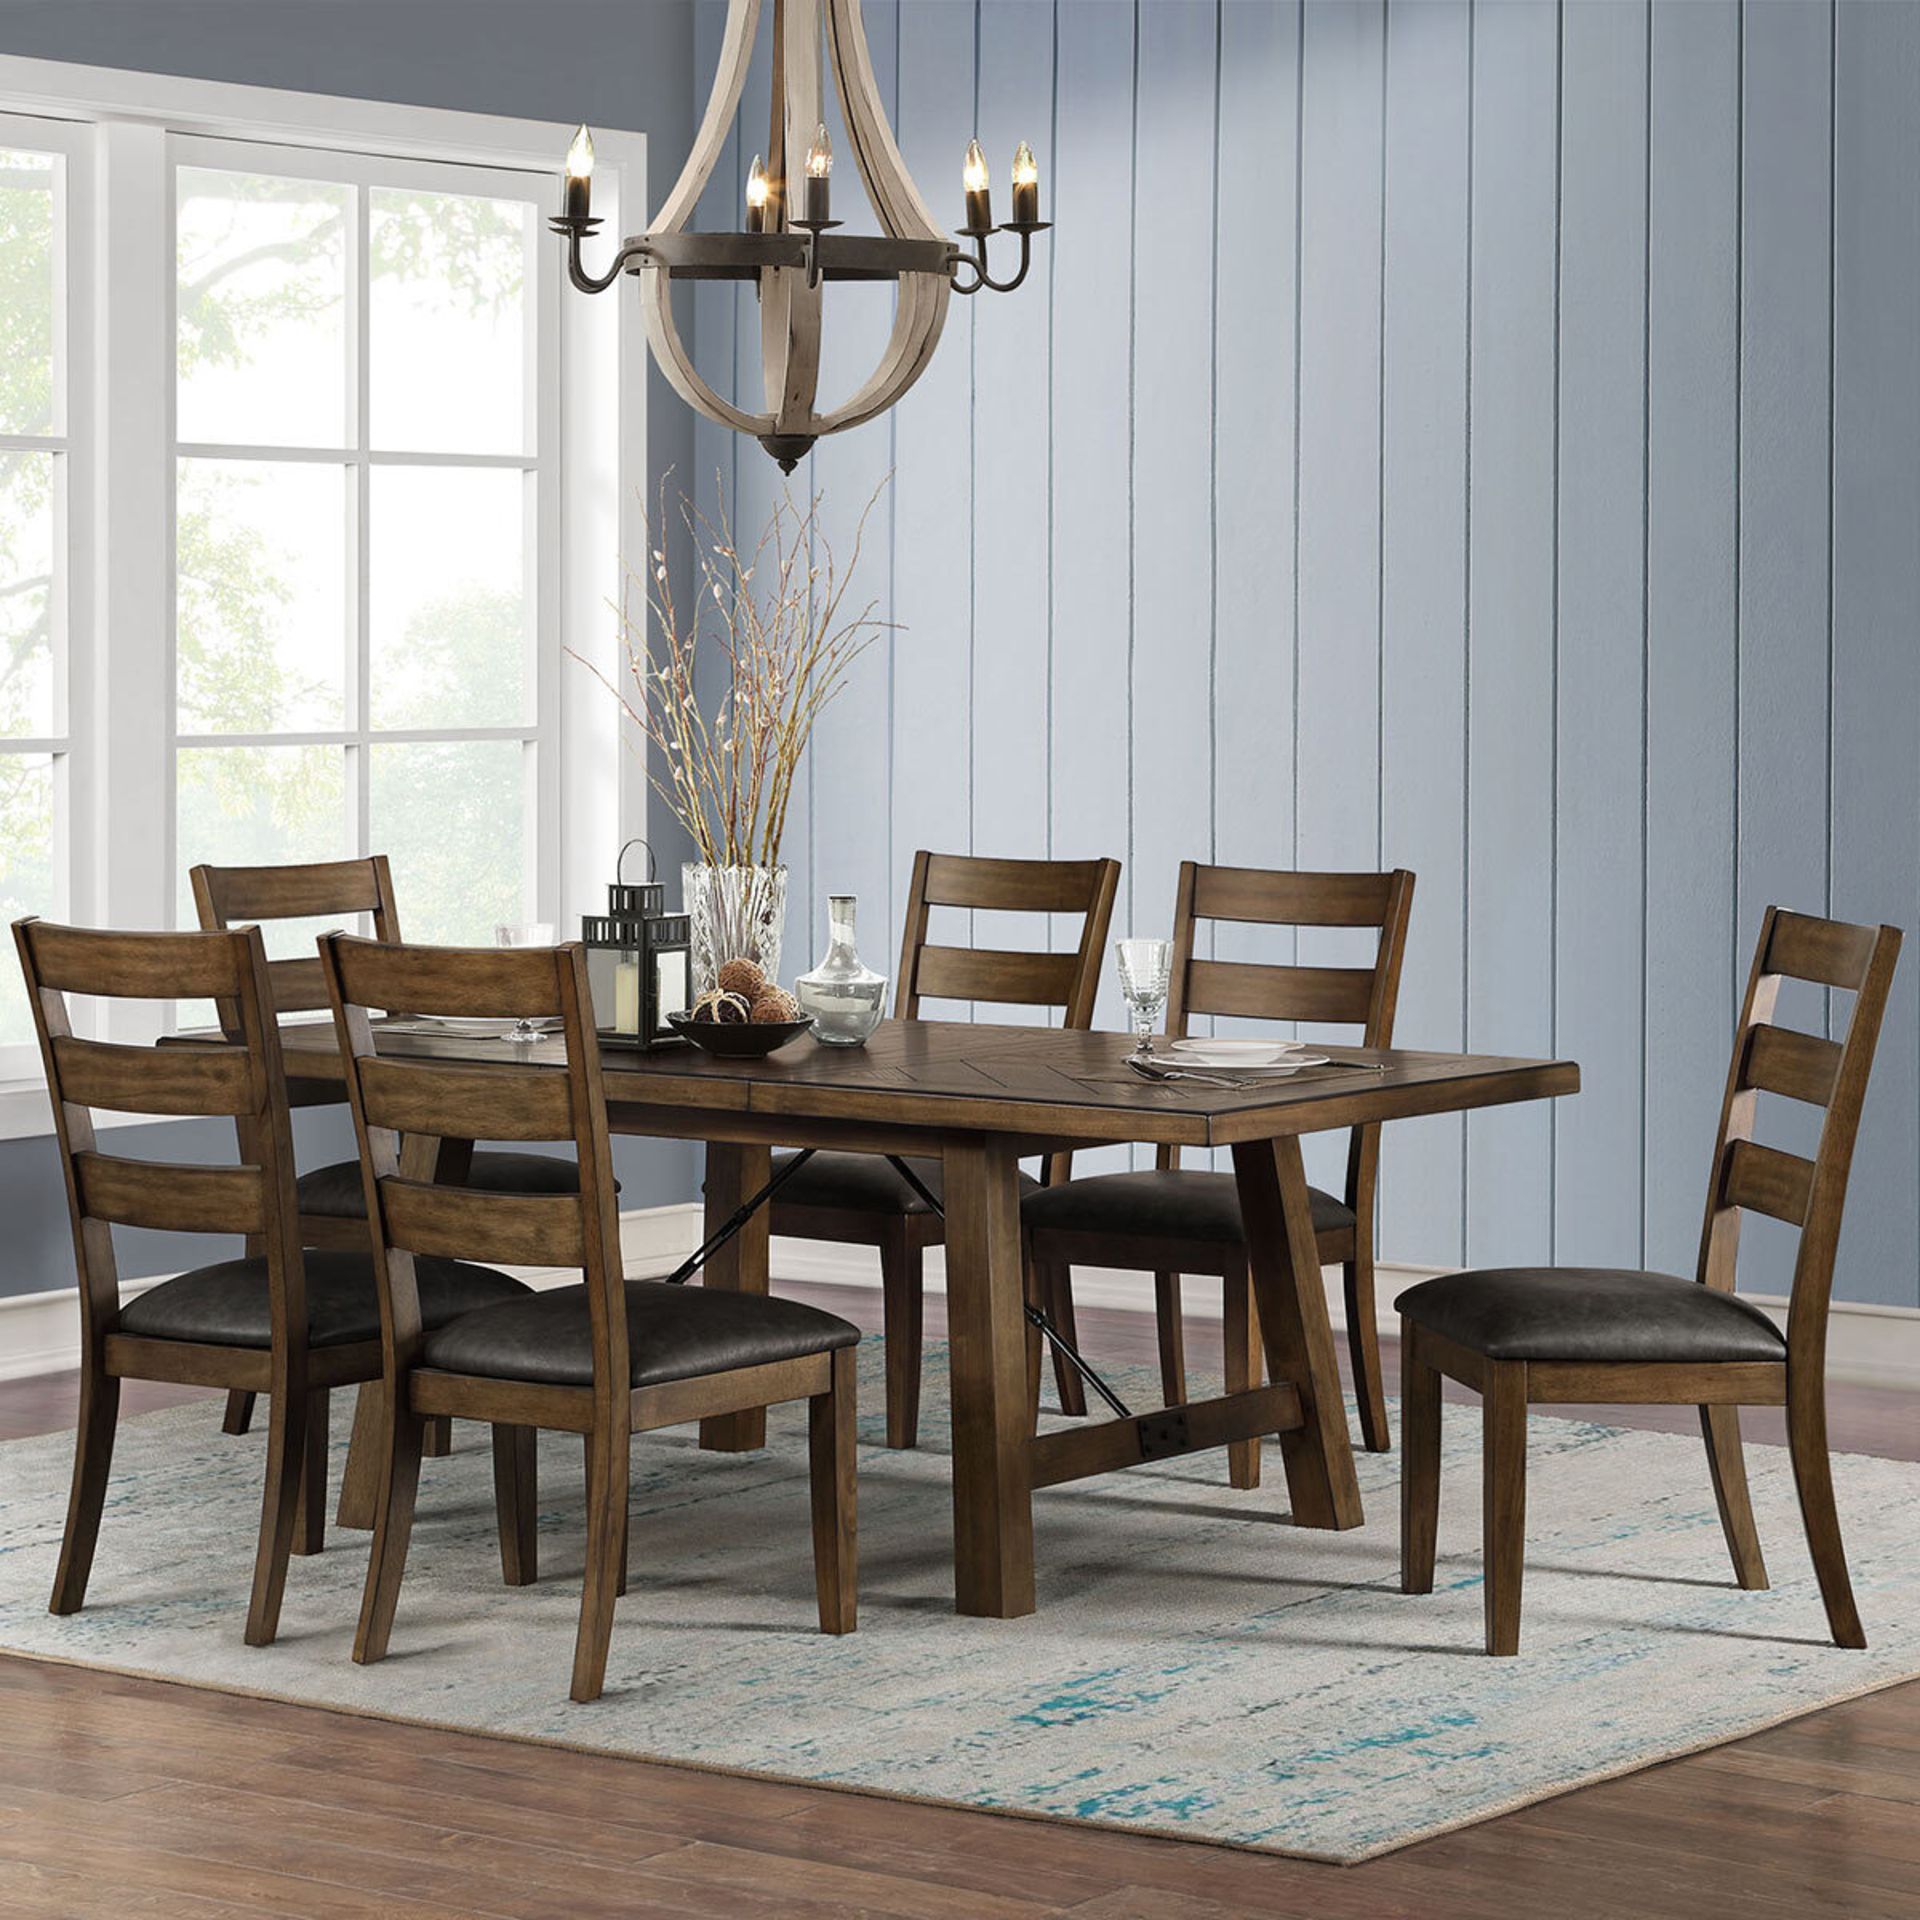 1 BAYSIDE FURNISHINGS EXTENDING DINING TABLE + 6 LADDER BACK CHAIRS RRP Â£999 (GENERIC IMAGE GUIDE)